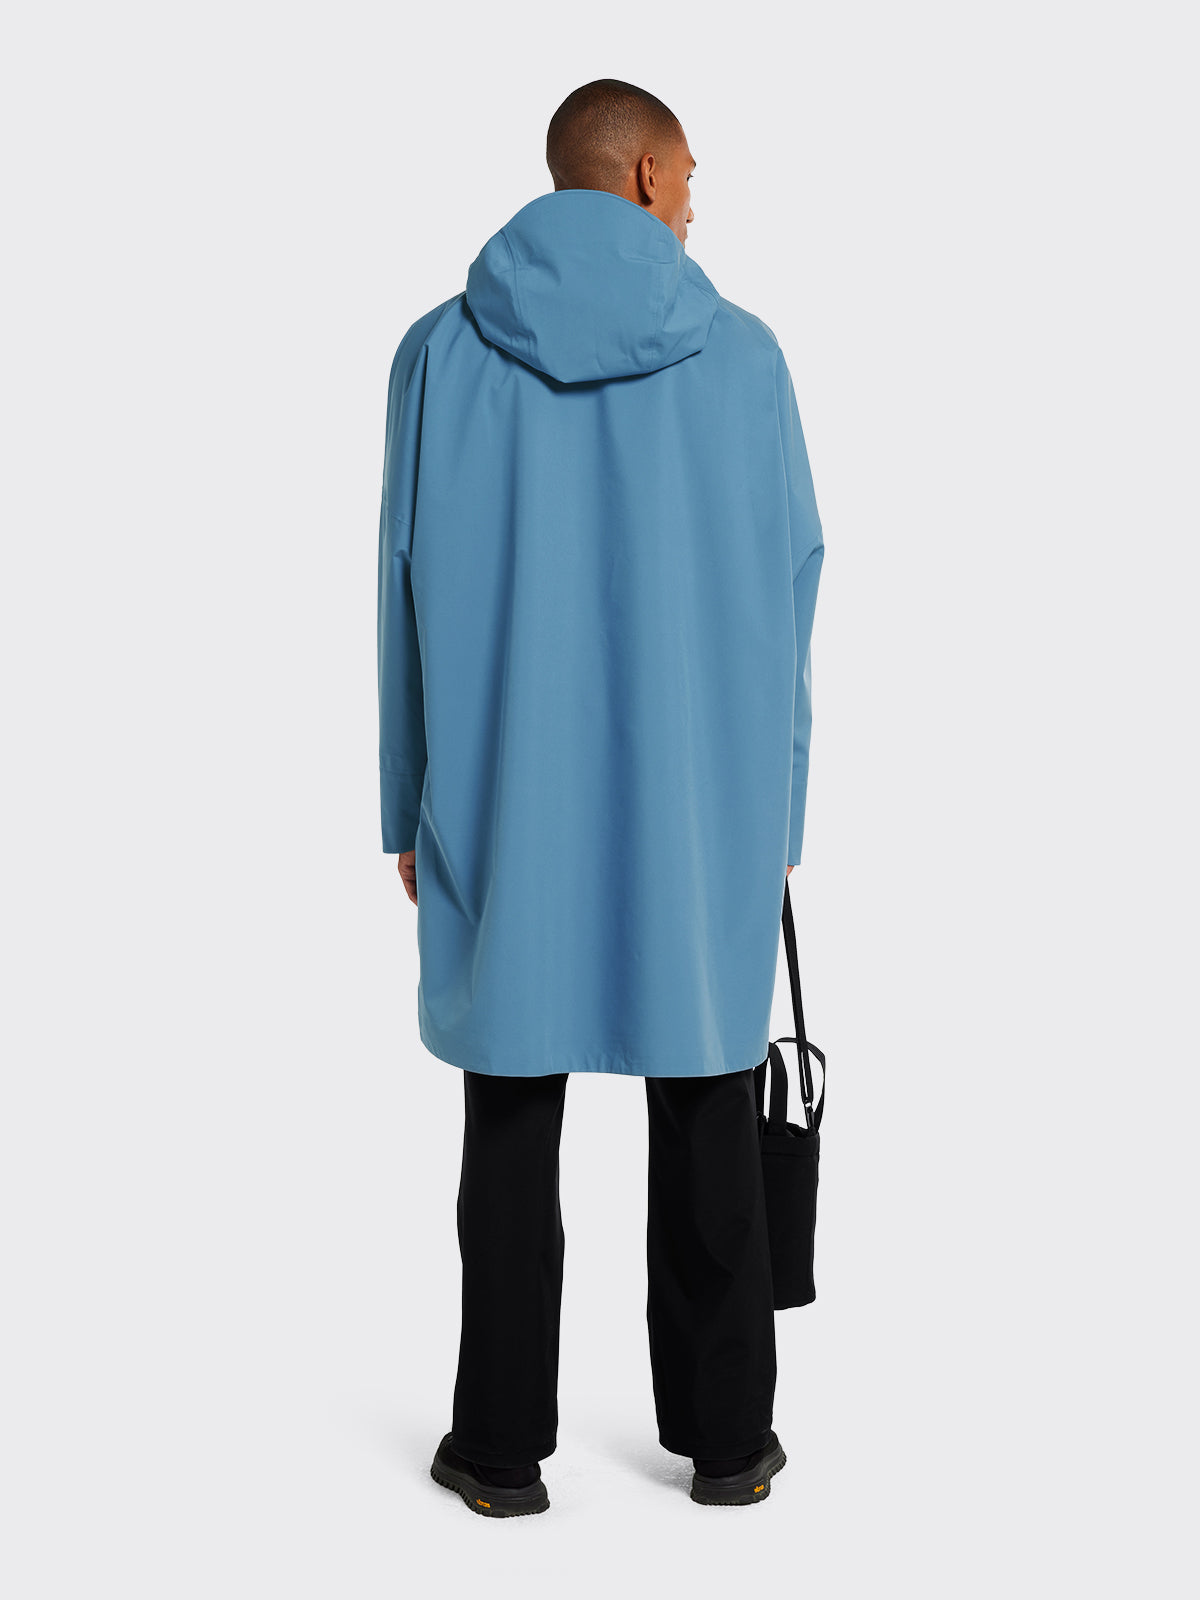 Man dressed in Aalesund poncho from Blæst in Coronet Blue